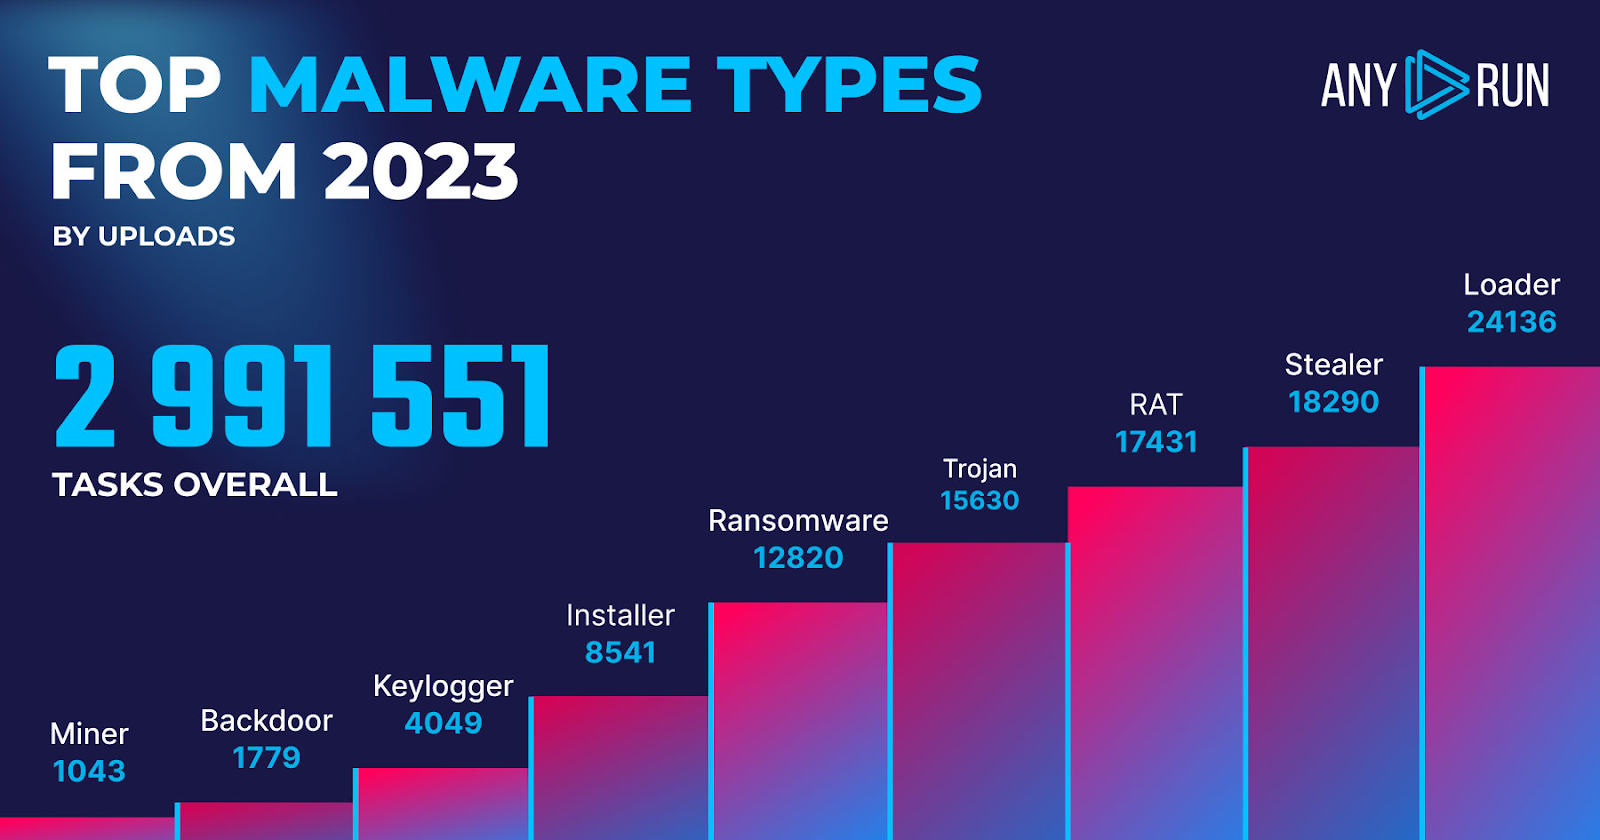 Top malware types (Source - ANY.RUN)